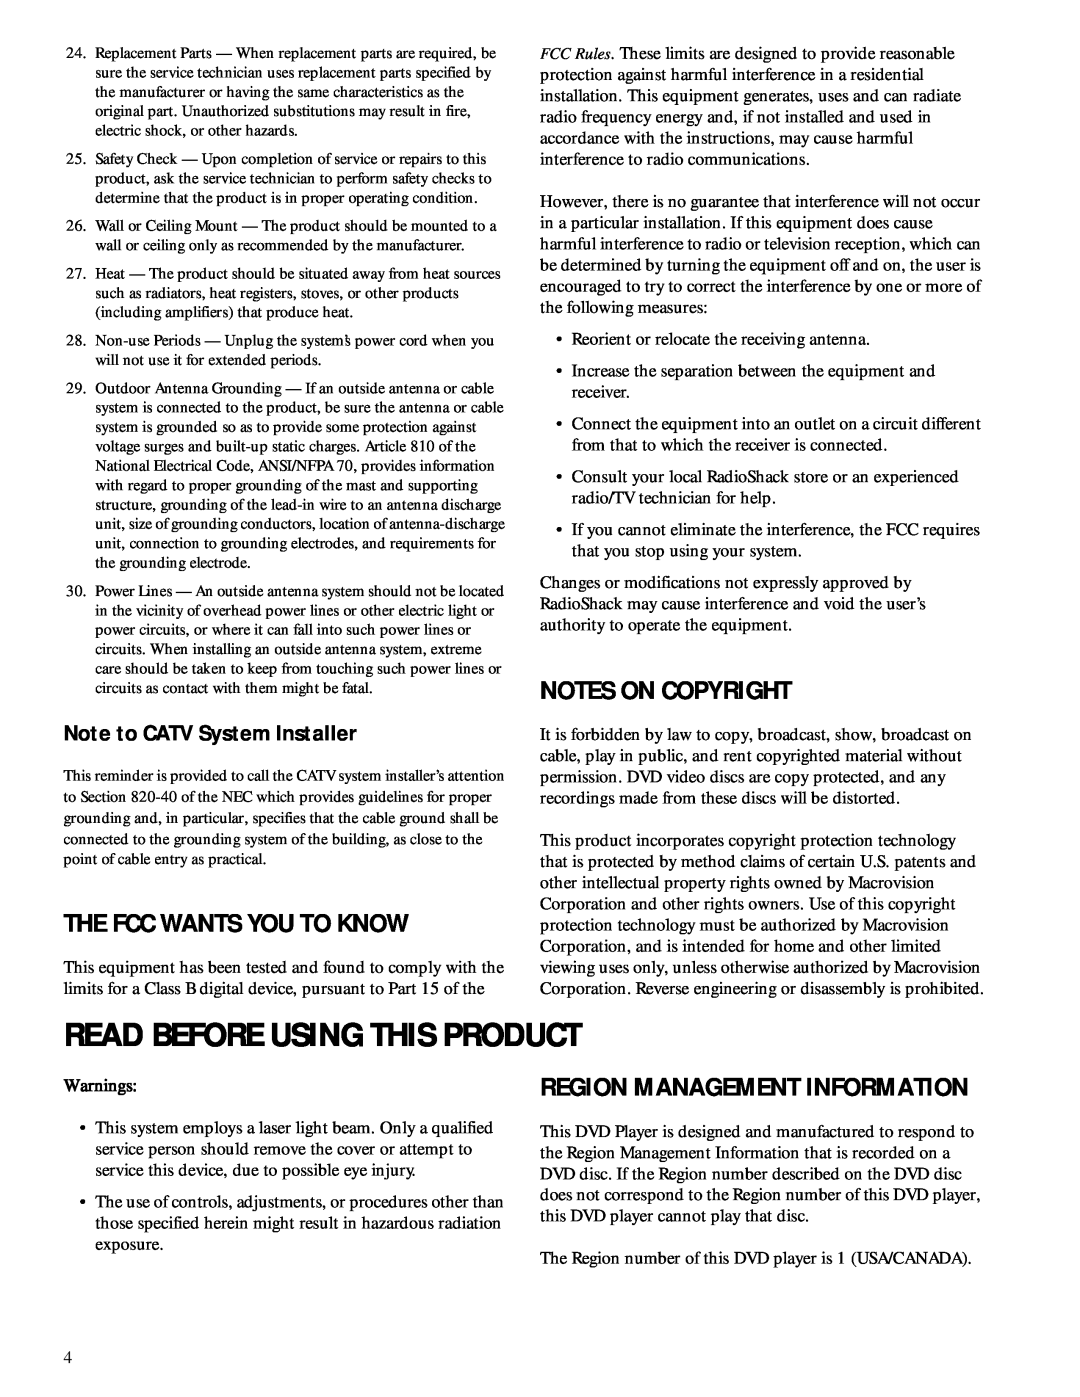 RCA 600-Watt Read Before Using This Product, The Fcc Wants You To Know, Notes On Copyright, Region Management Information 